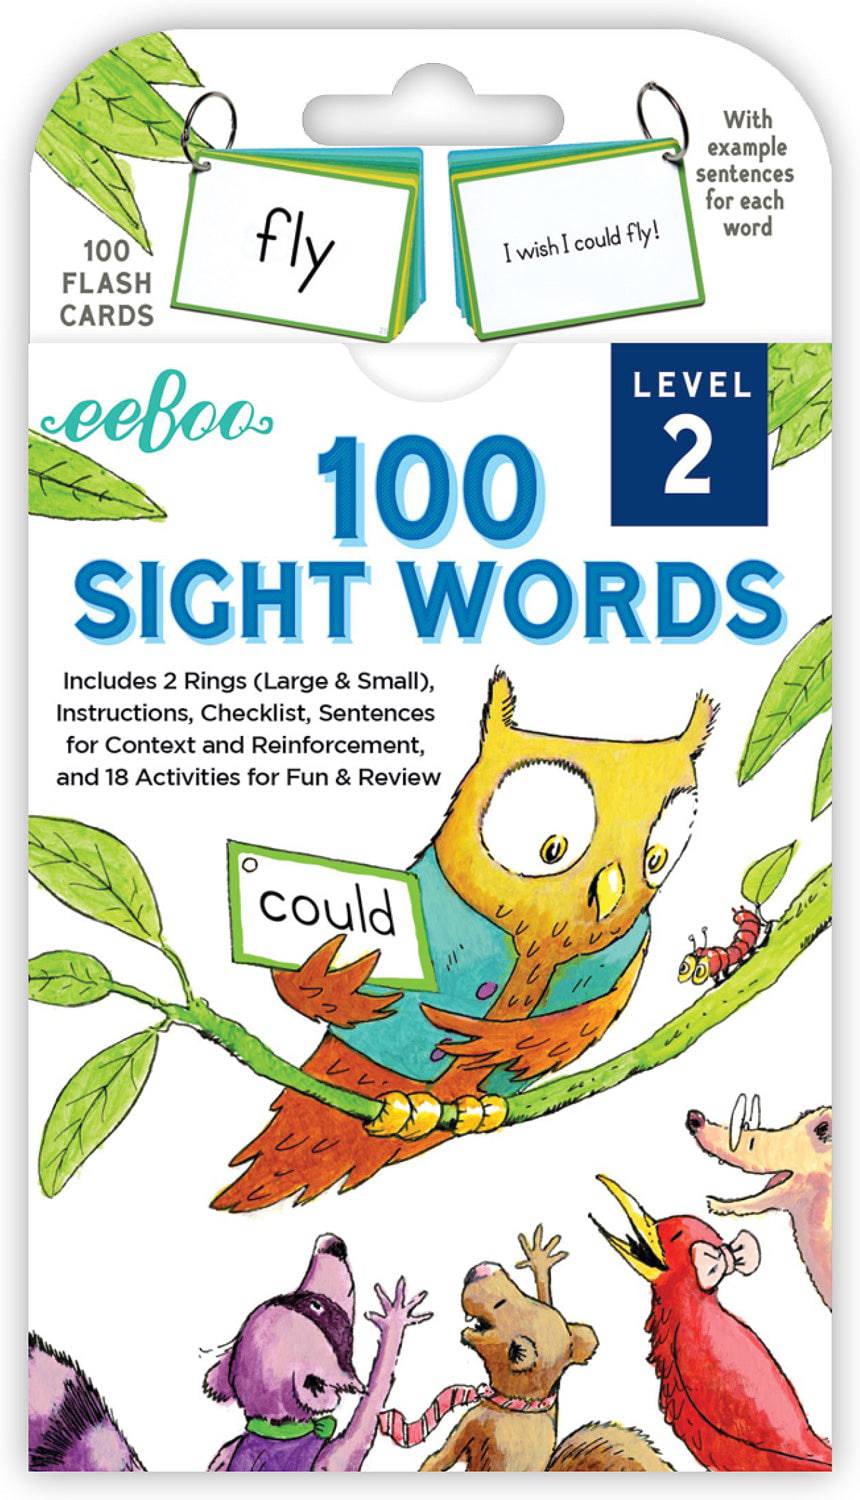 FLSW2 100 SIGHT WORDS LEVEL 2 - A Child's Delight